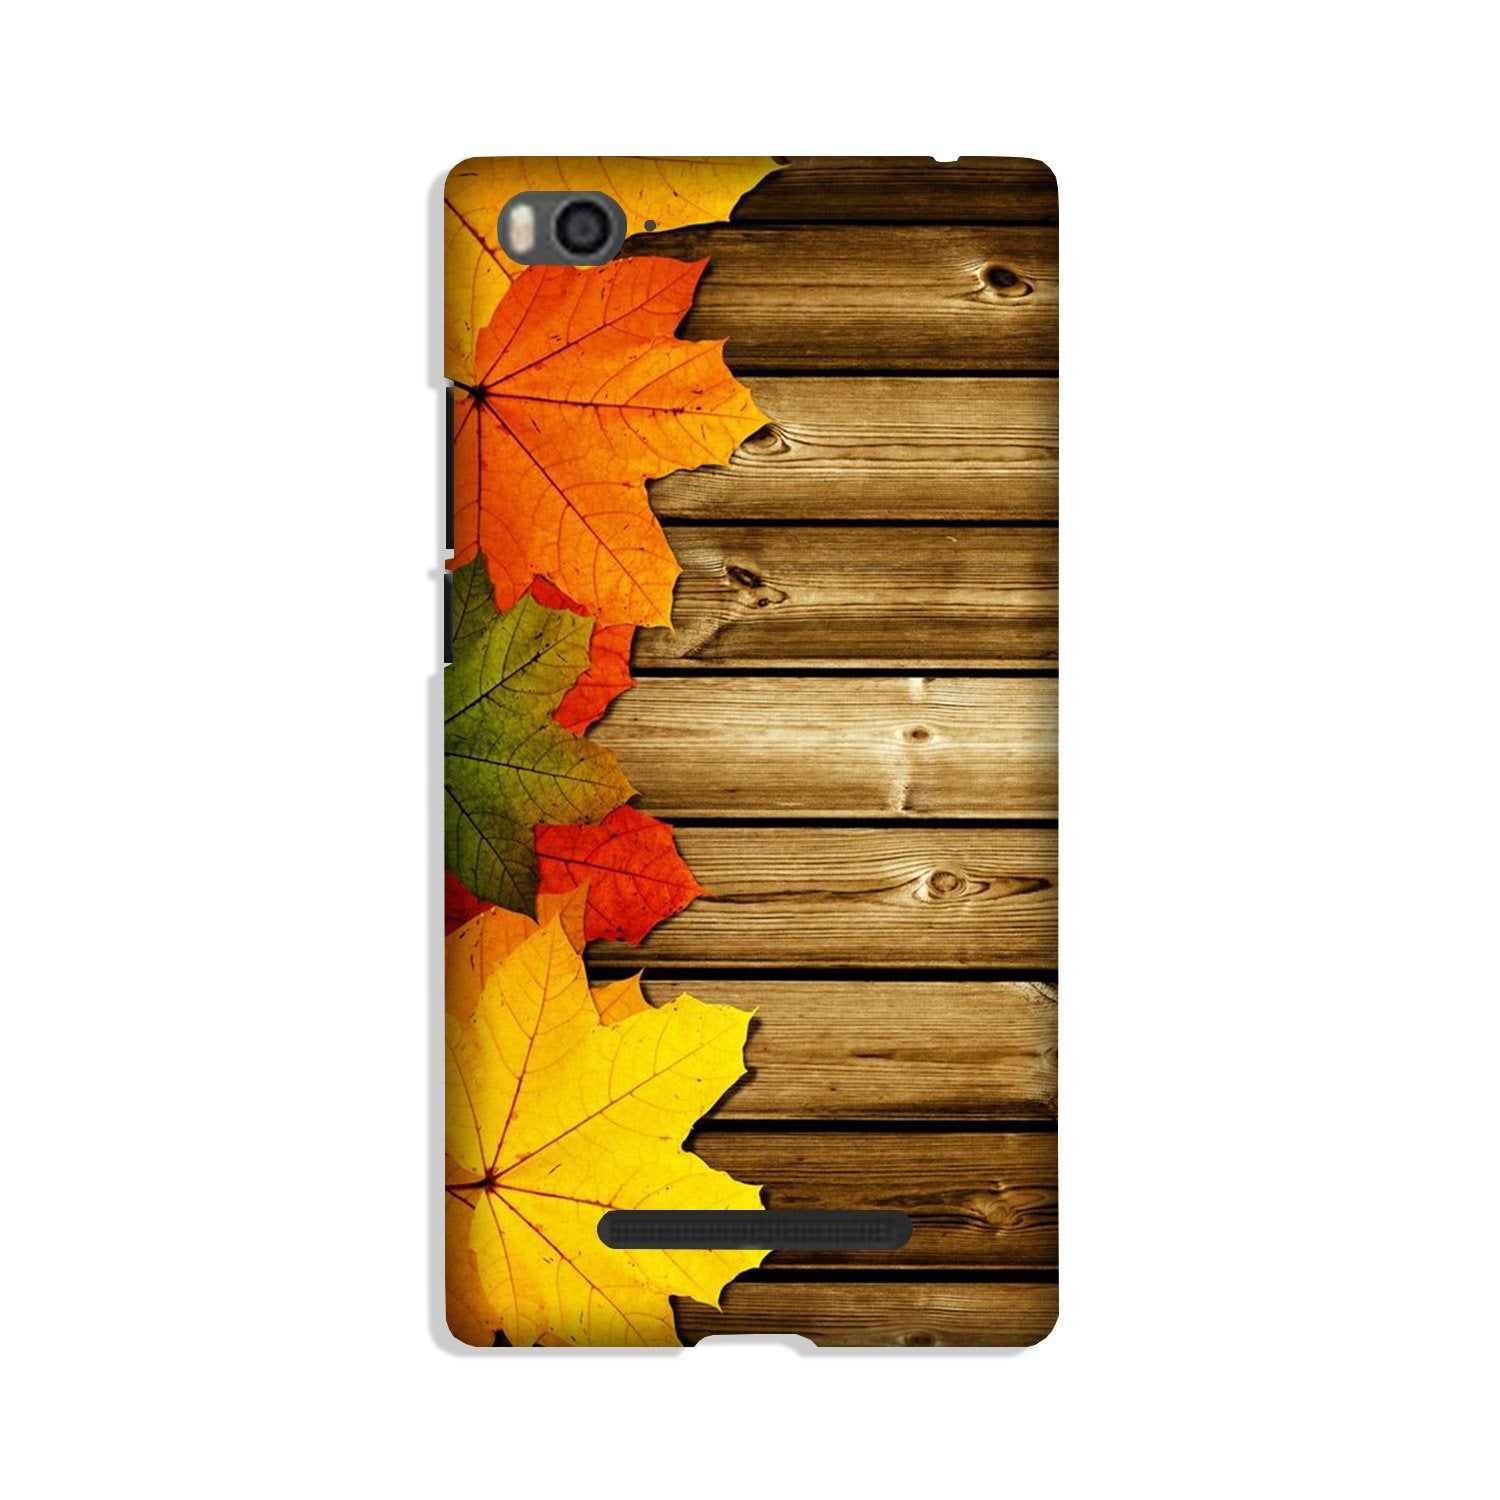 Wooden look3 Case for Redmi 4A